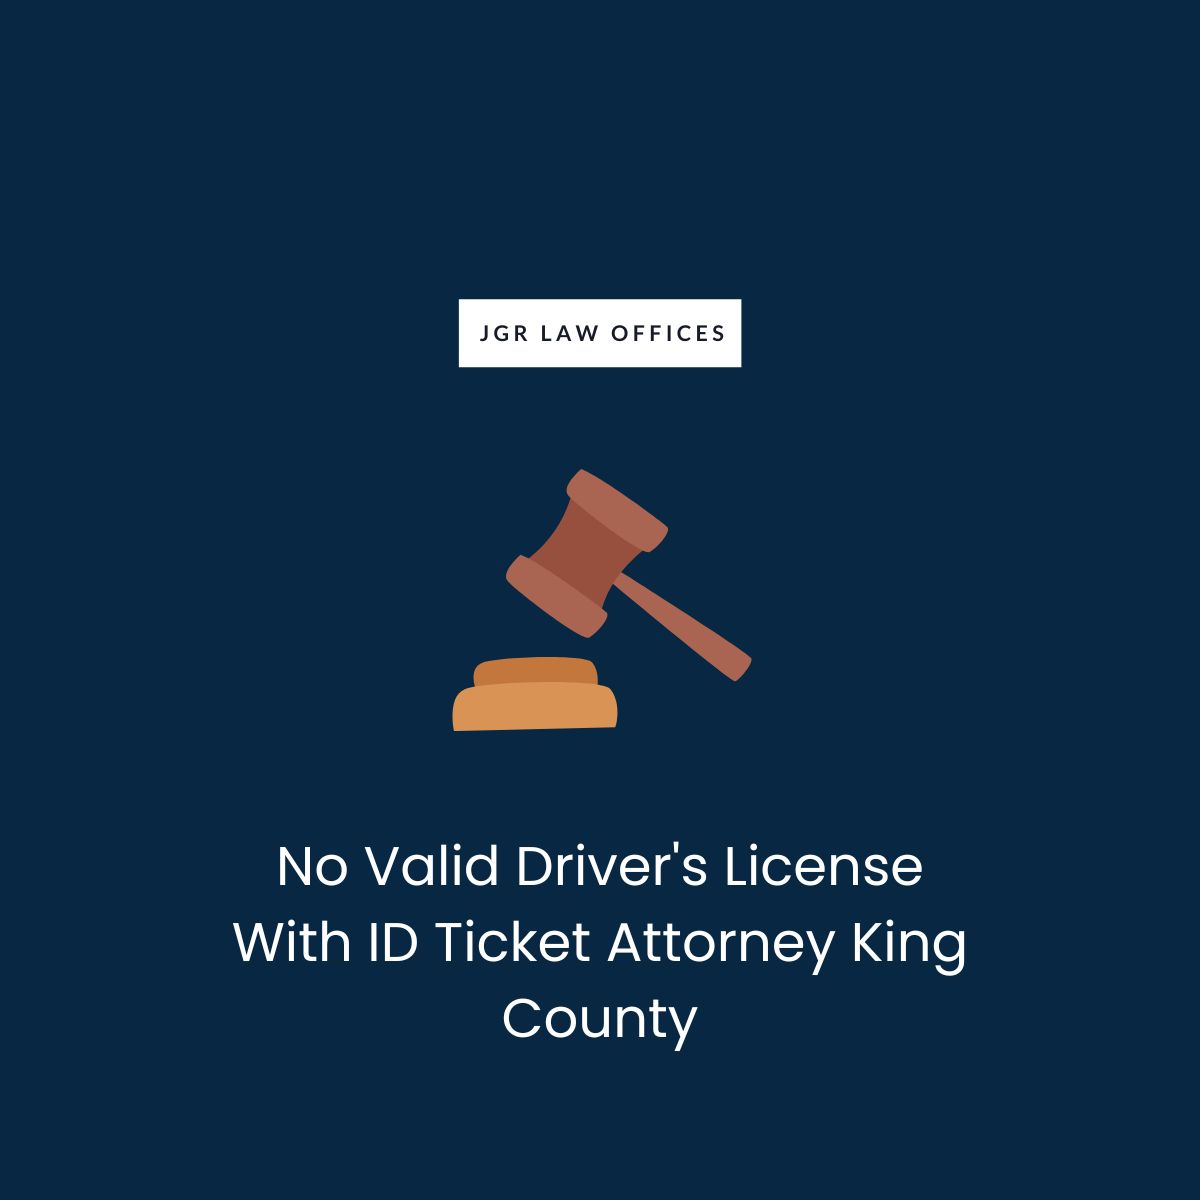 No Valid Driver's License With ID Ticket Attorney King County